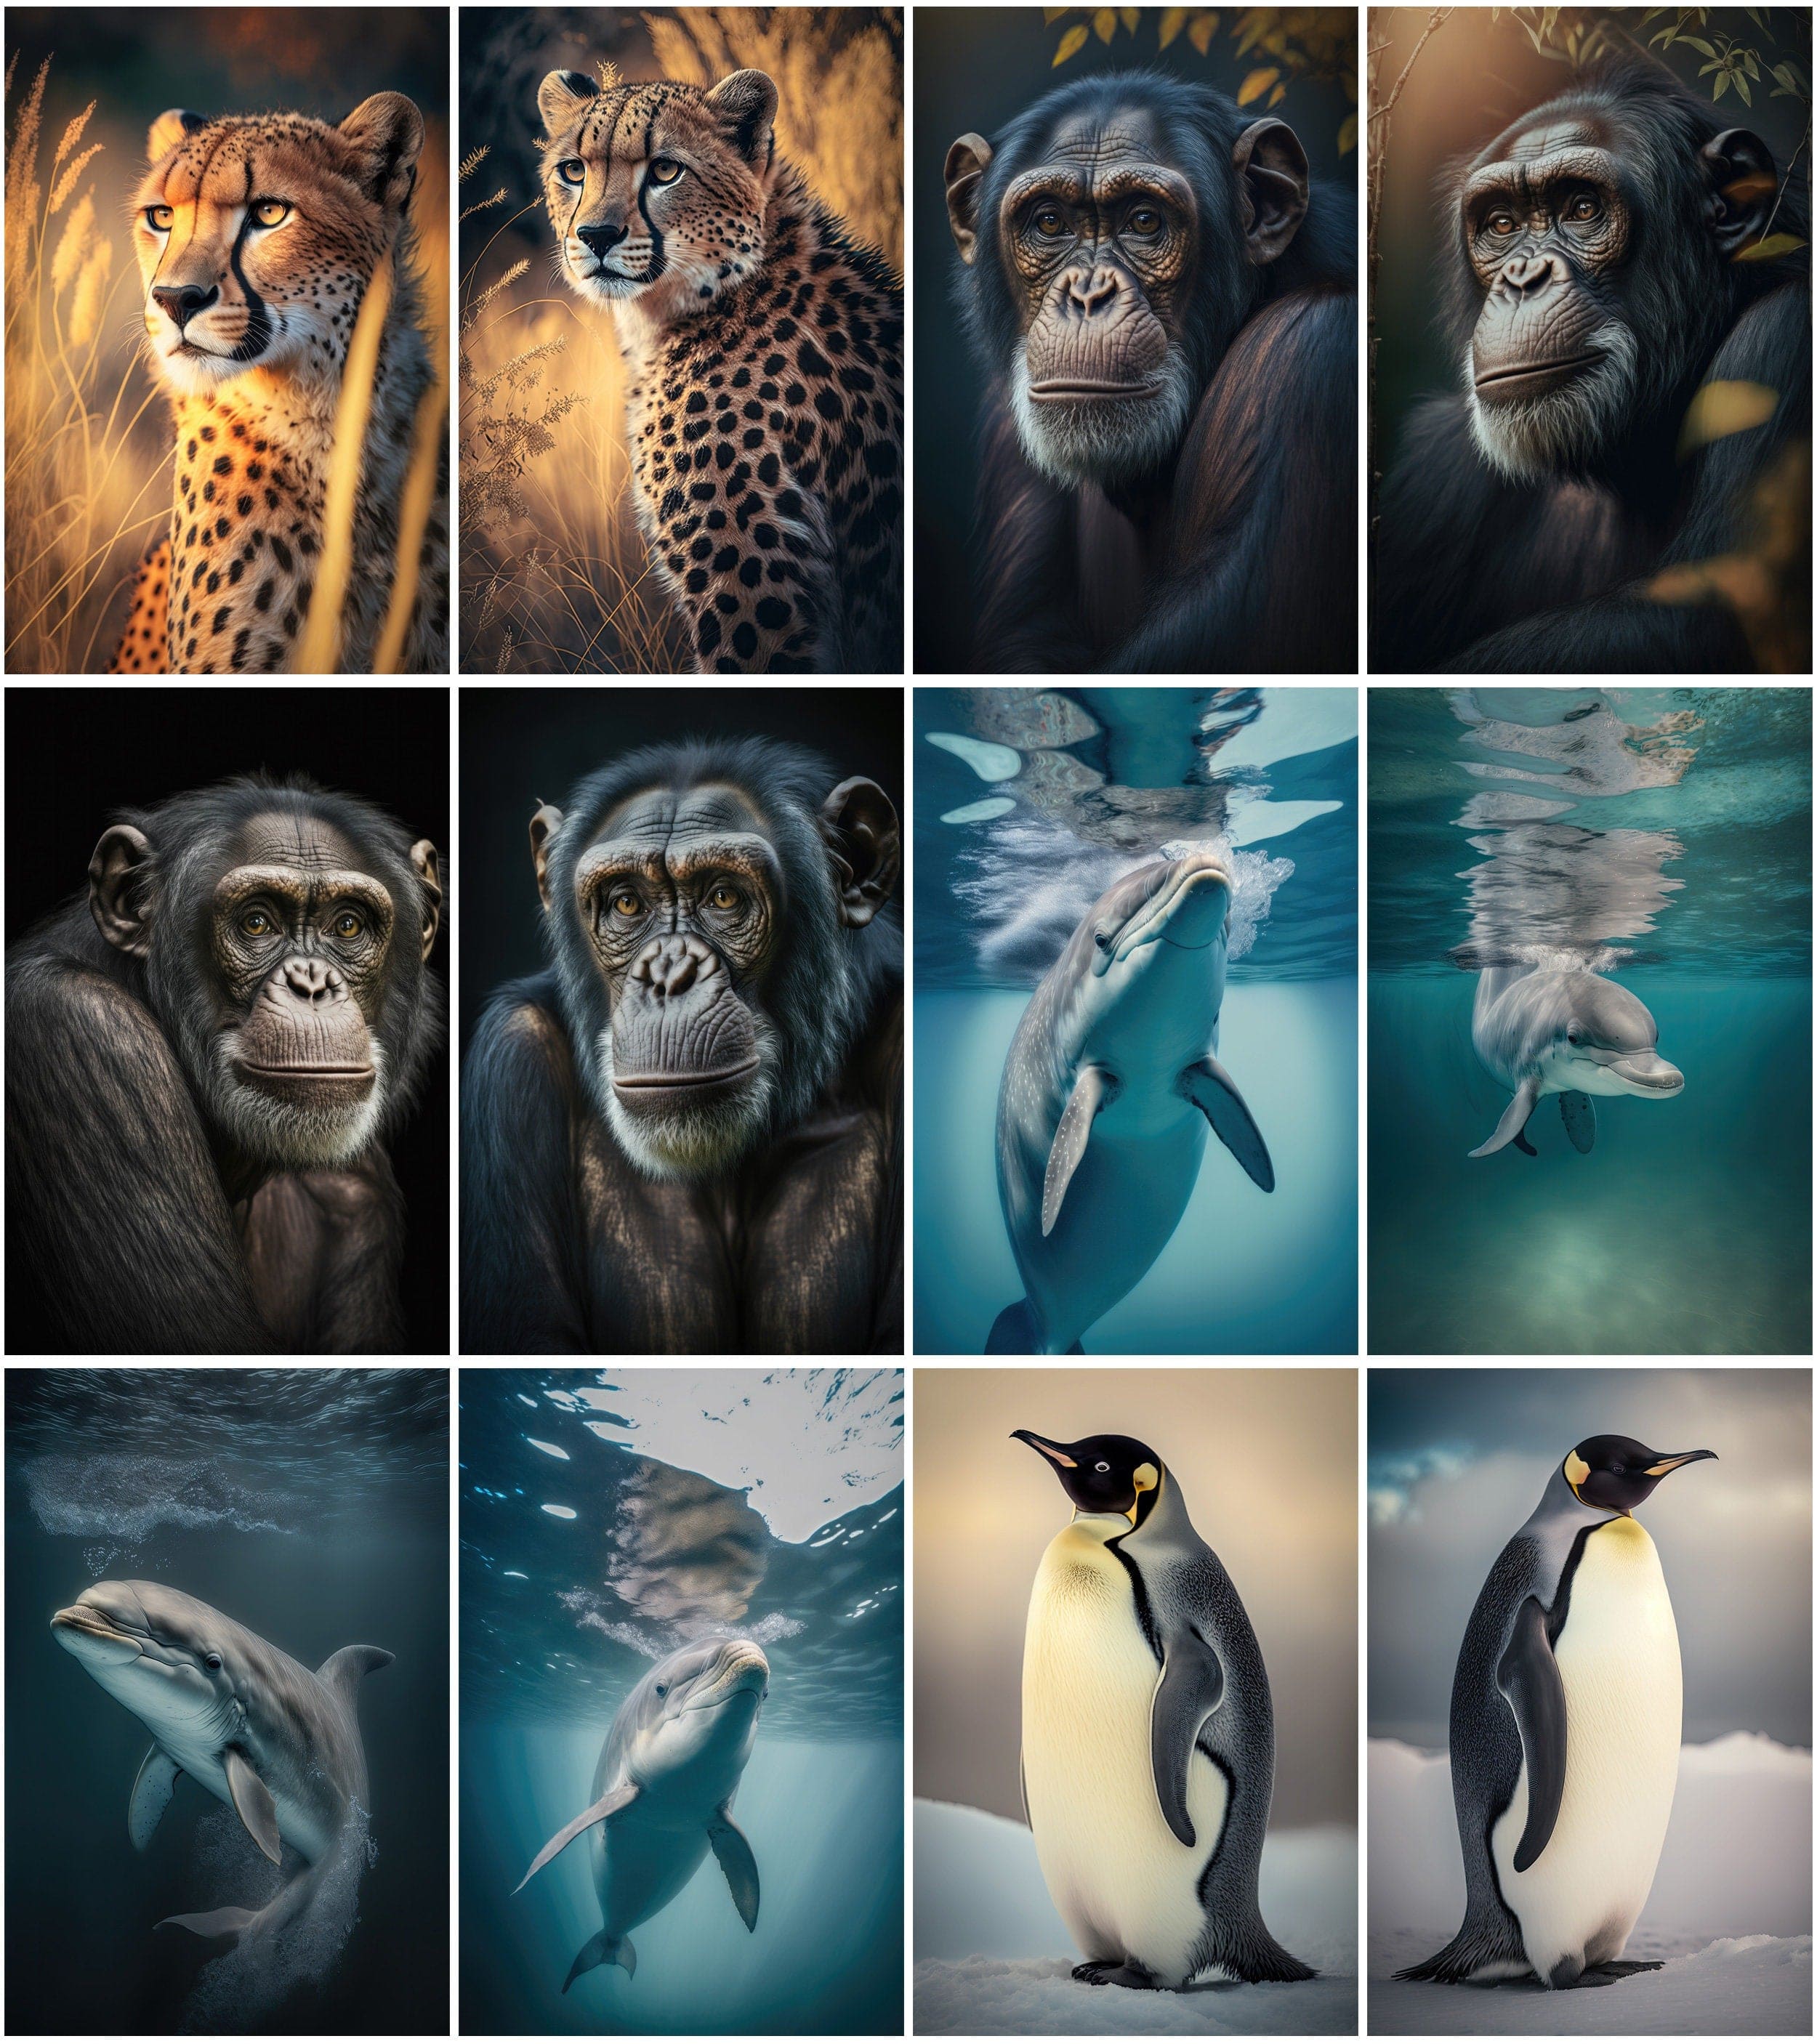 Transform Your Home with 200 Unique Animal Prints | Affordable Art for Animal Lovers Digital Download Sumobundle